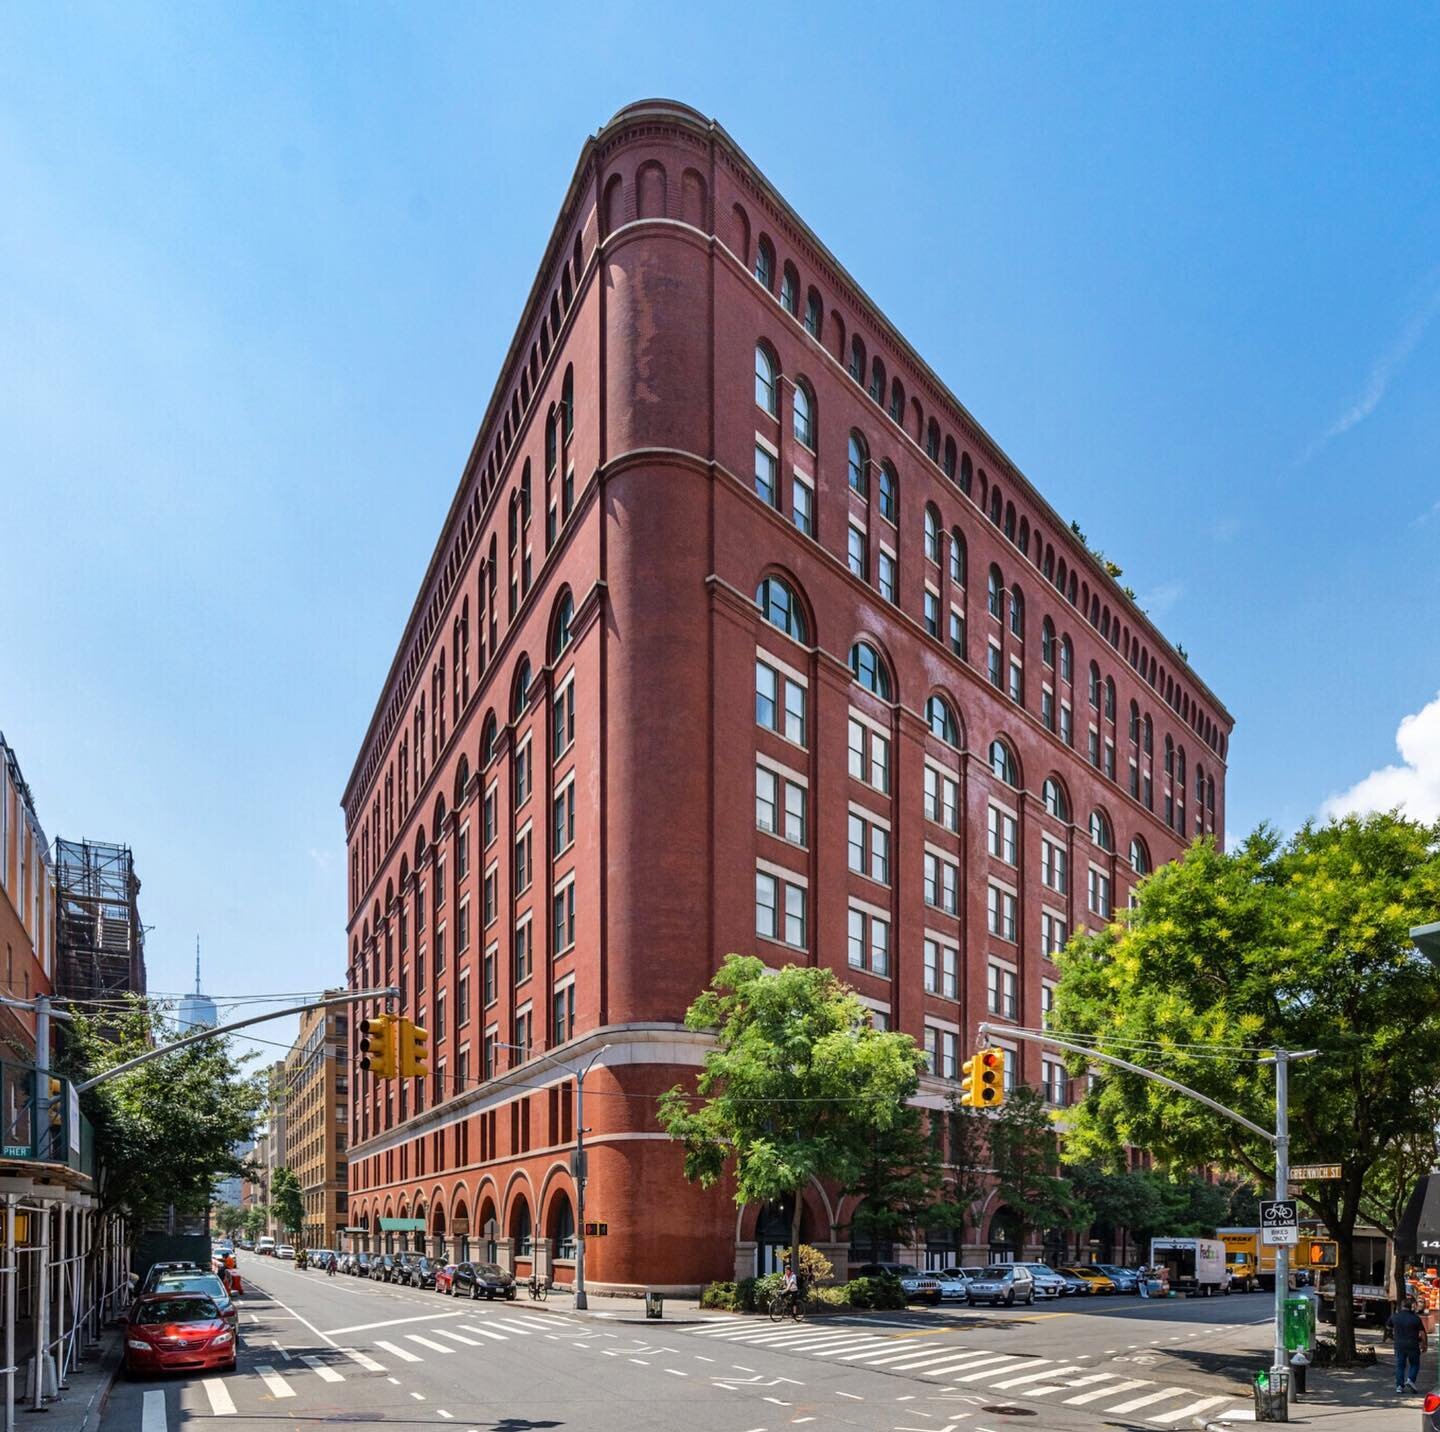 HAPPY WKND!!! Ecstatic to add this historic landmarked gem to our project line up this Fall! 💫💫💫
The Archive has defined West Village style since 1899. The impressive 10-story, full block building with double-height ceilings, arched windows, and u